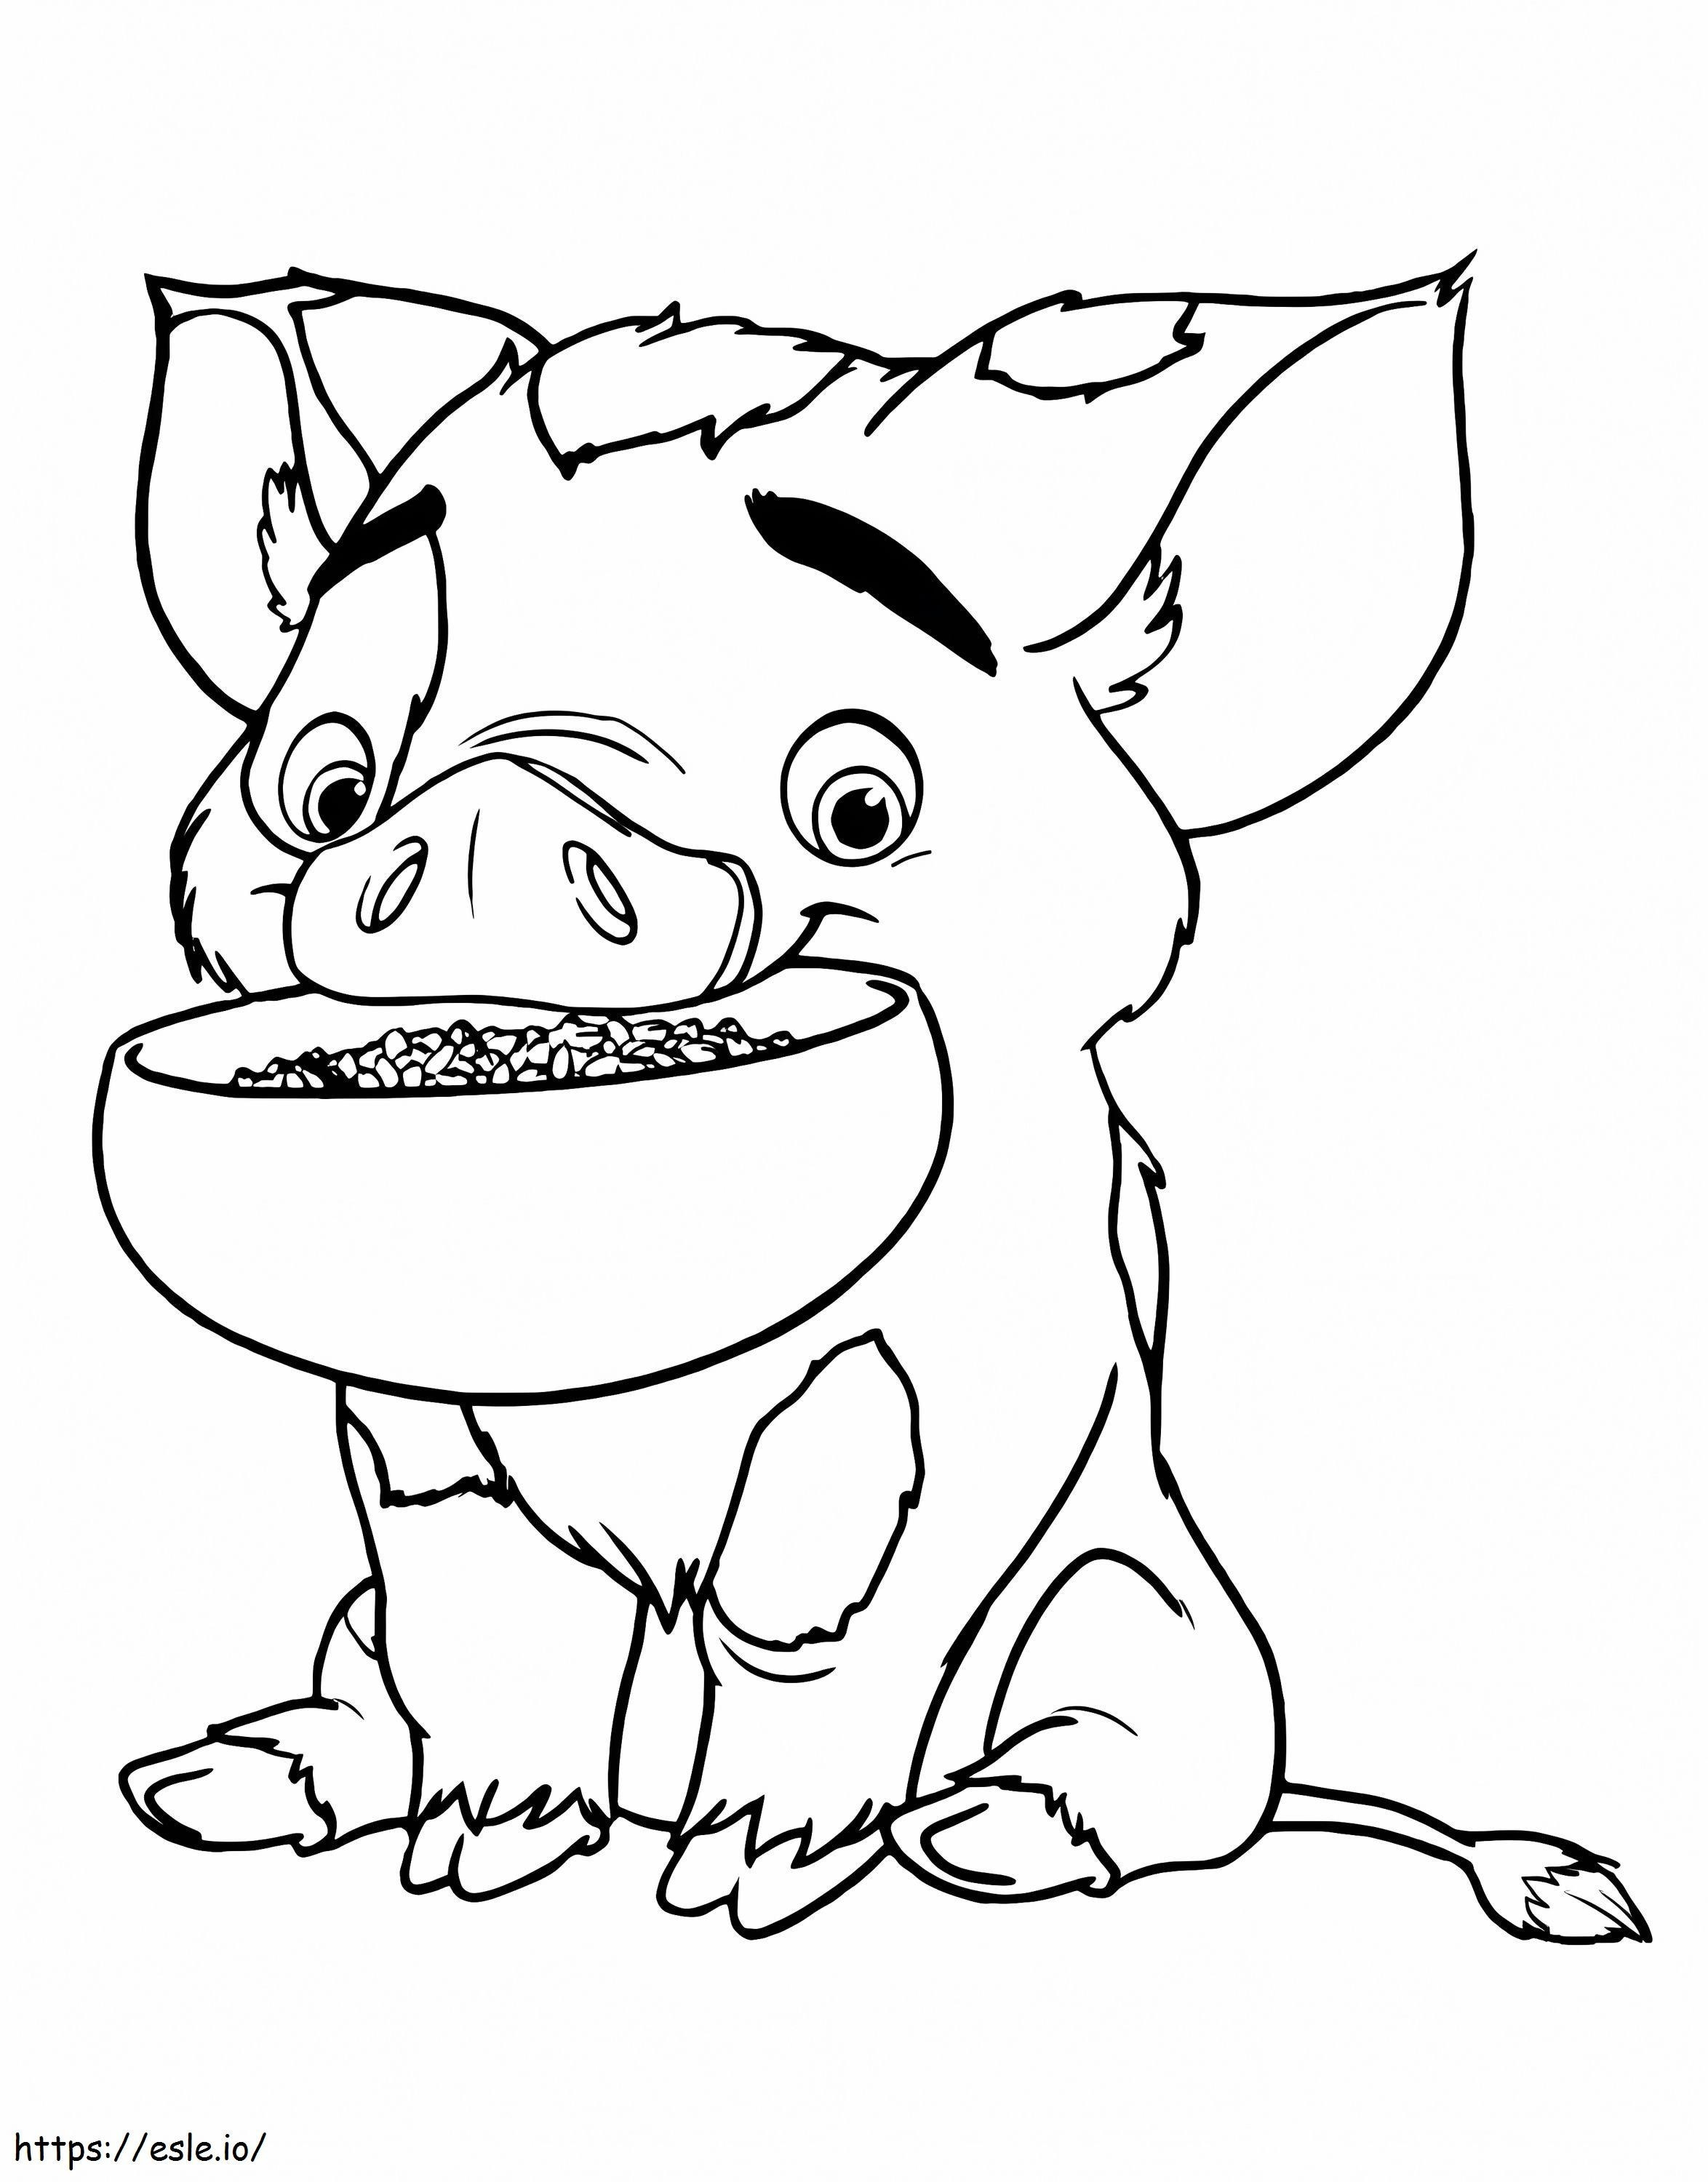 Pua And Food coloring page